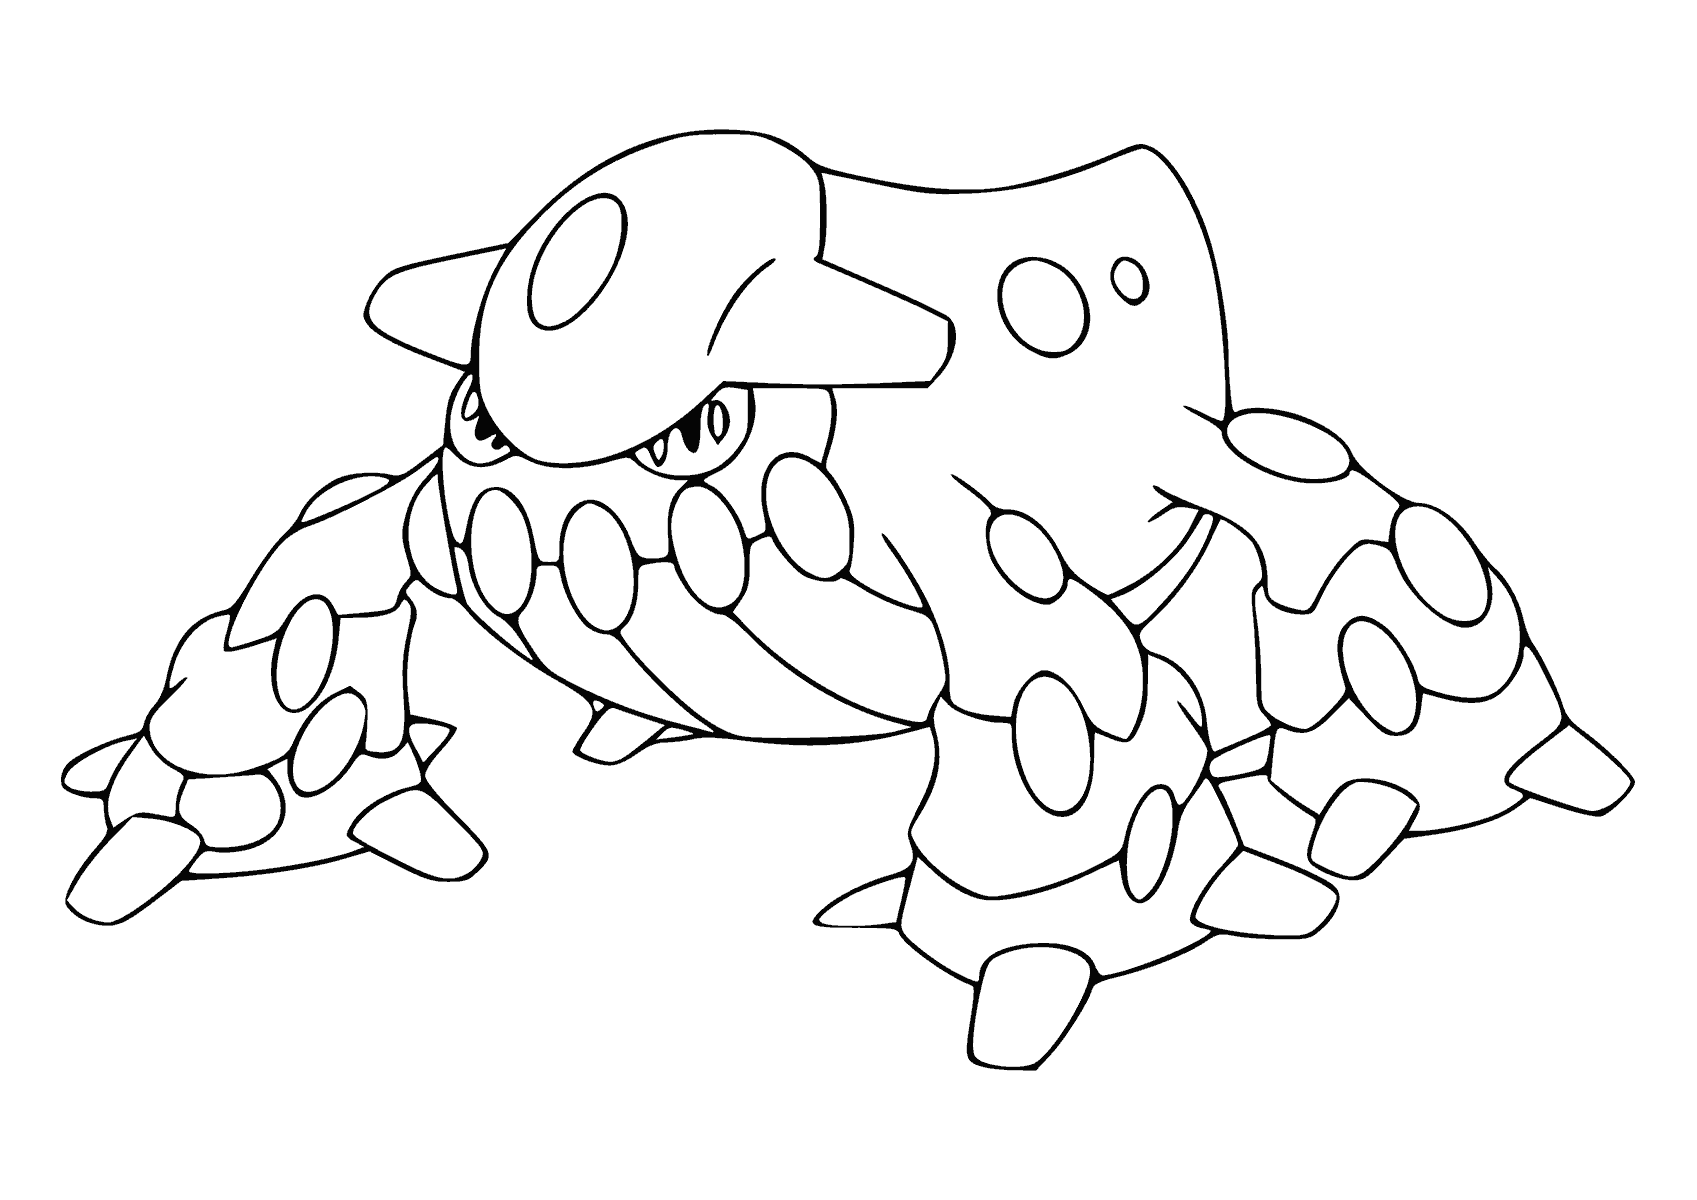 coloring page: Large red dragon-like Pokémon with flaming mane, yellow eyes, and black plates on back/tail.